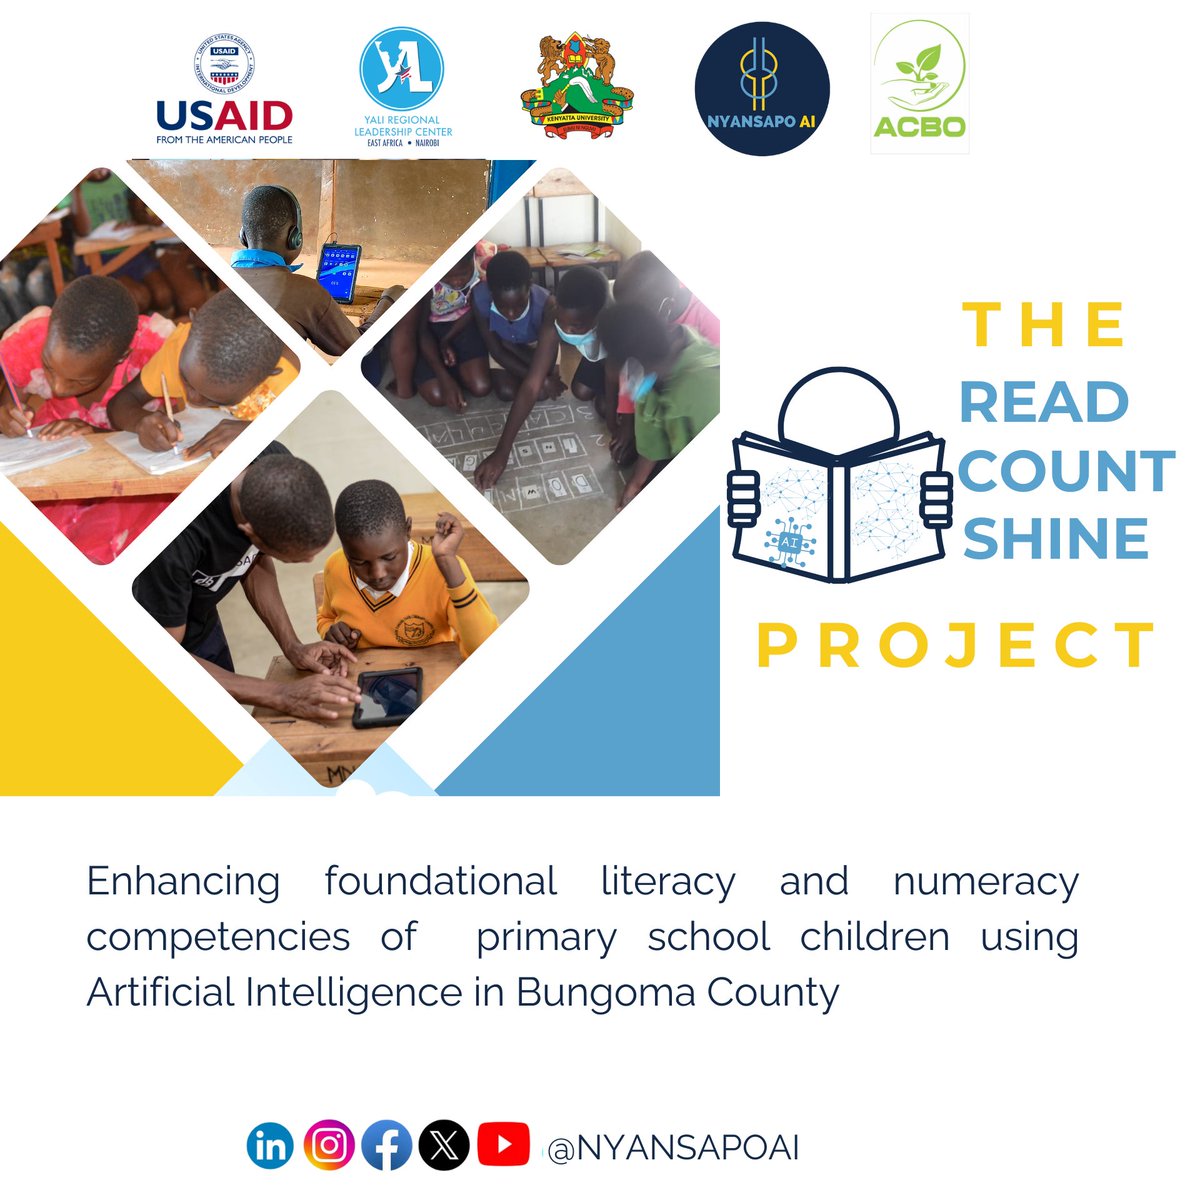 We are thrilled to share our Project in Bungoma ,in partnership with @usaid @yali_rlc_ea @kenyattauniversity and Amani CBO,the read count and shine project is aimed at enhancing foundational literacy and numeracy in Bungoma county 
#AIforkids #literacy #numeracy #letthemlearn